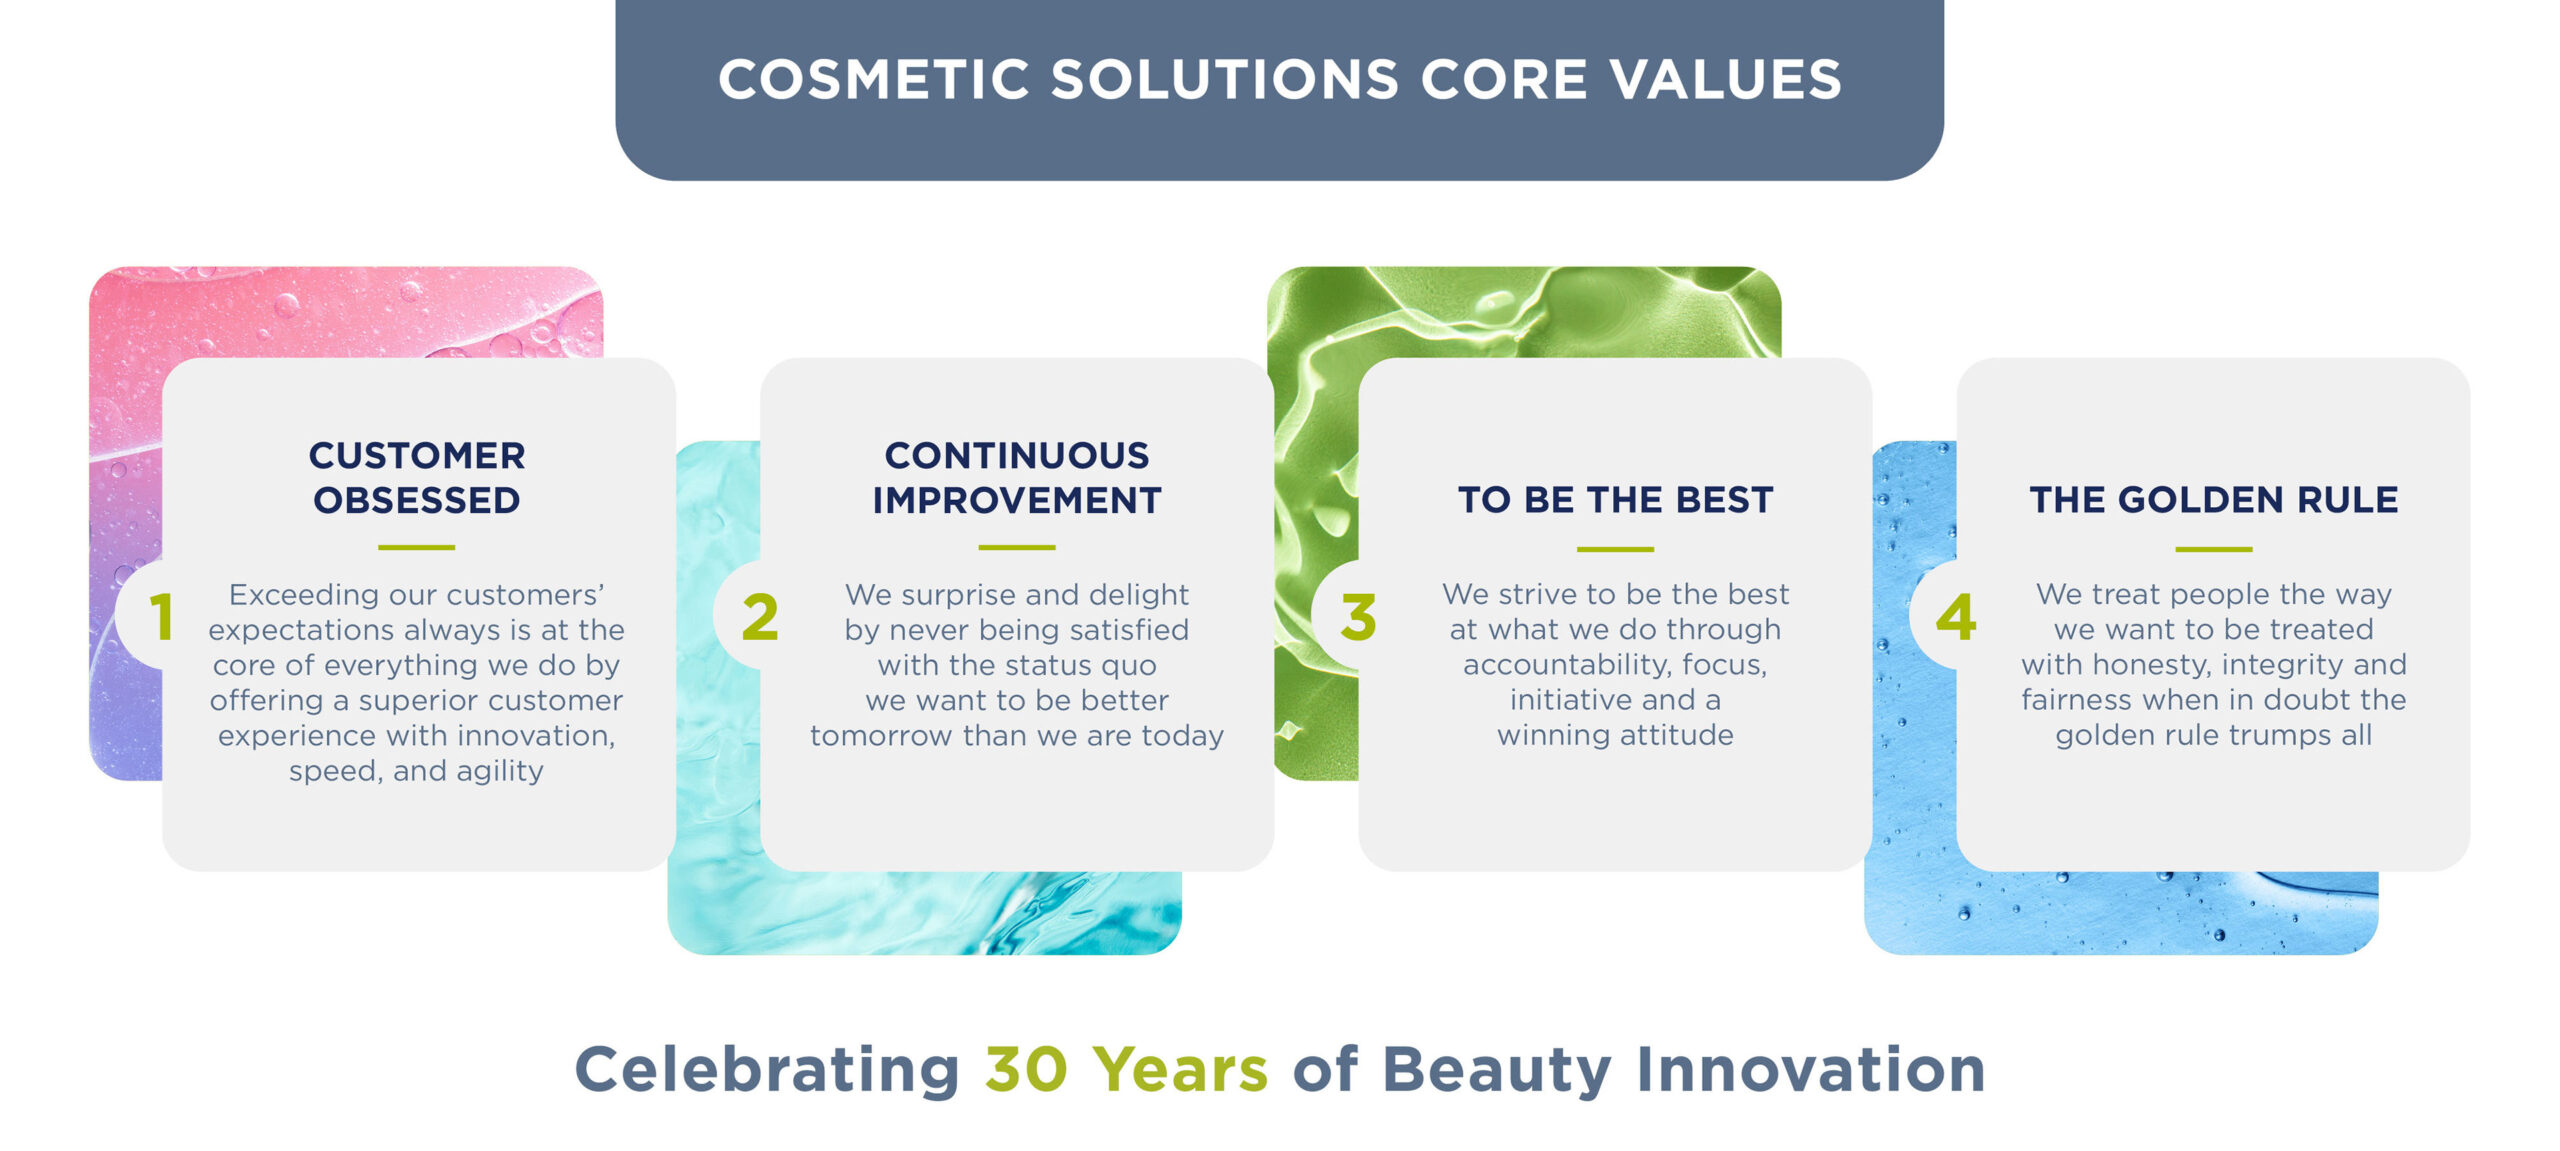 Cosmetic Solutions Core Values image